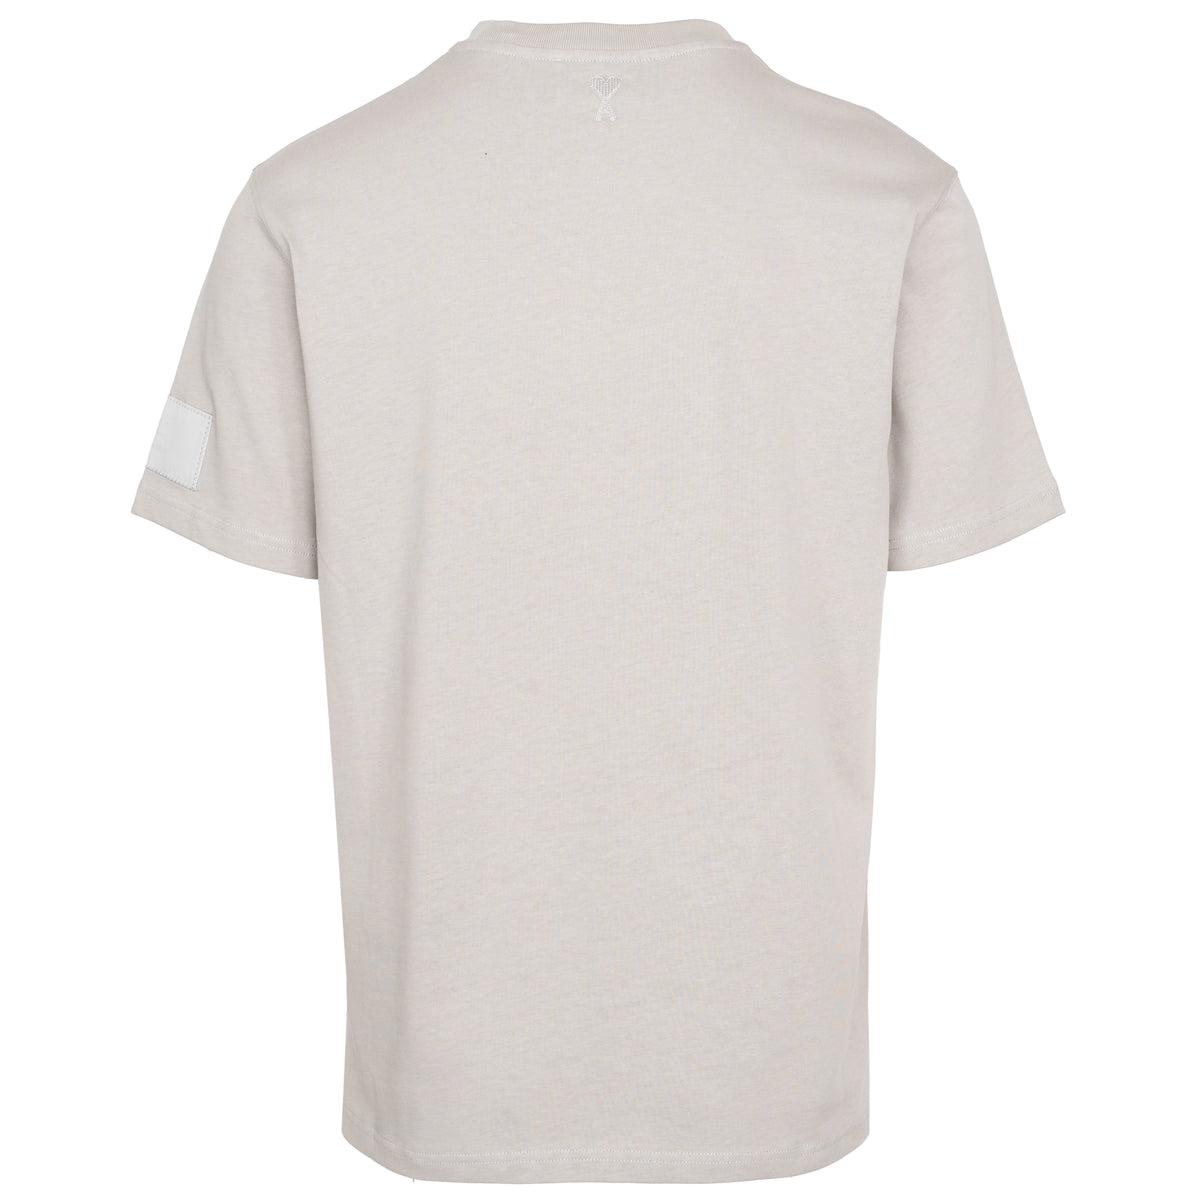 Load image into Gallery viewer, AMI Pearl Grey AMI Sleeve Patch Tee
